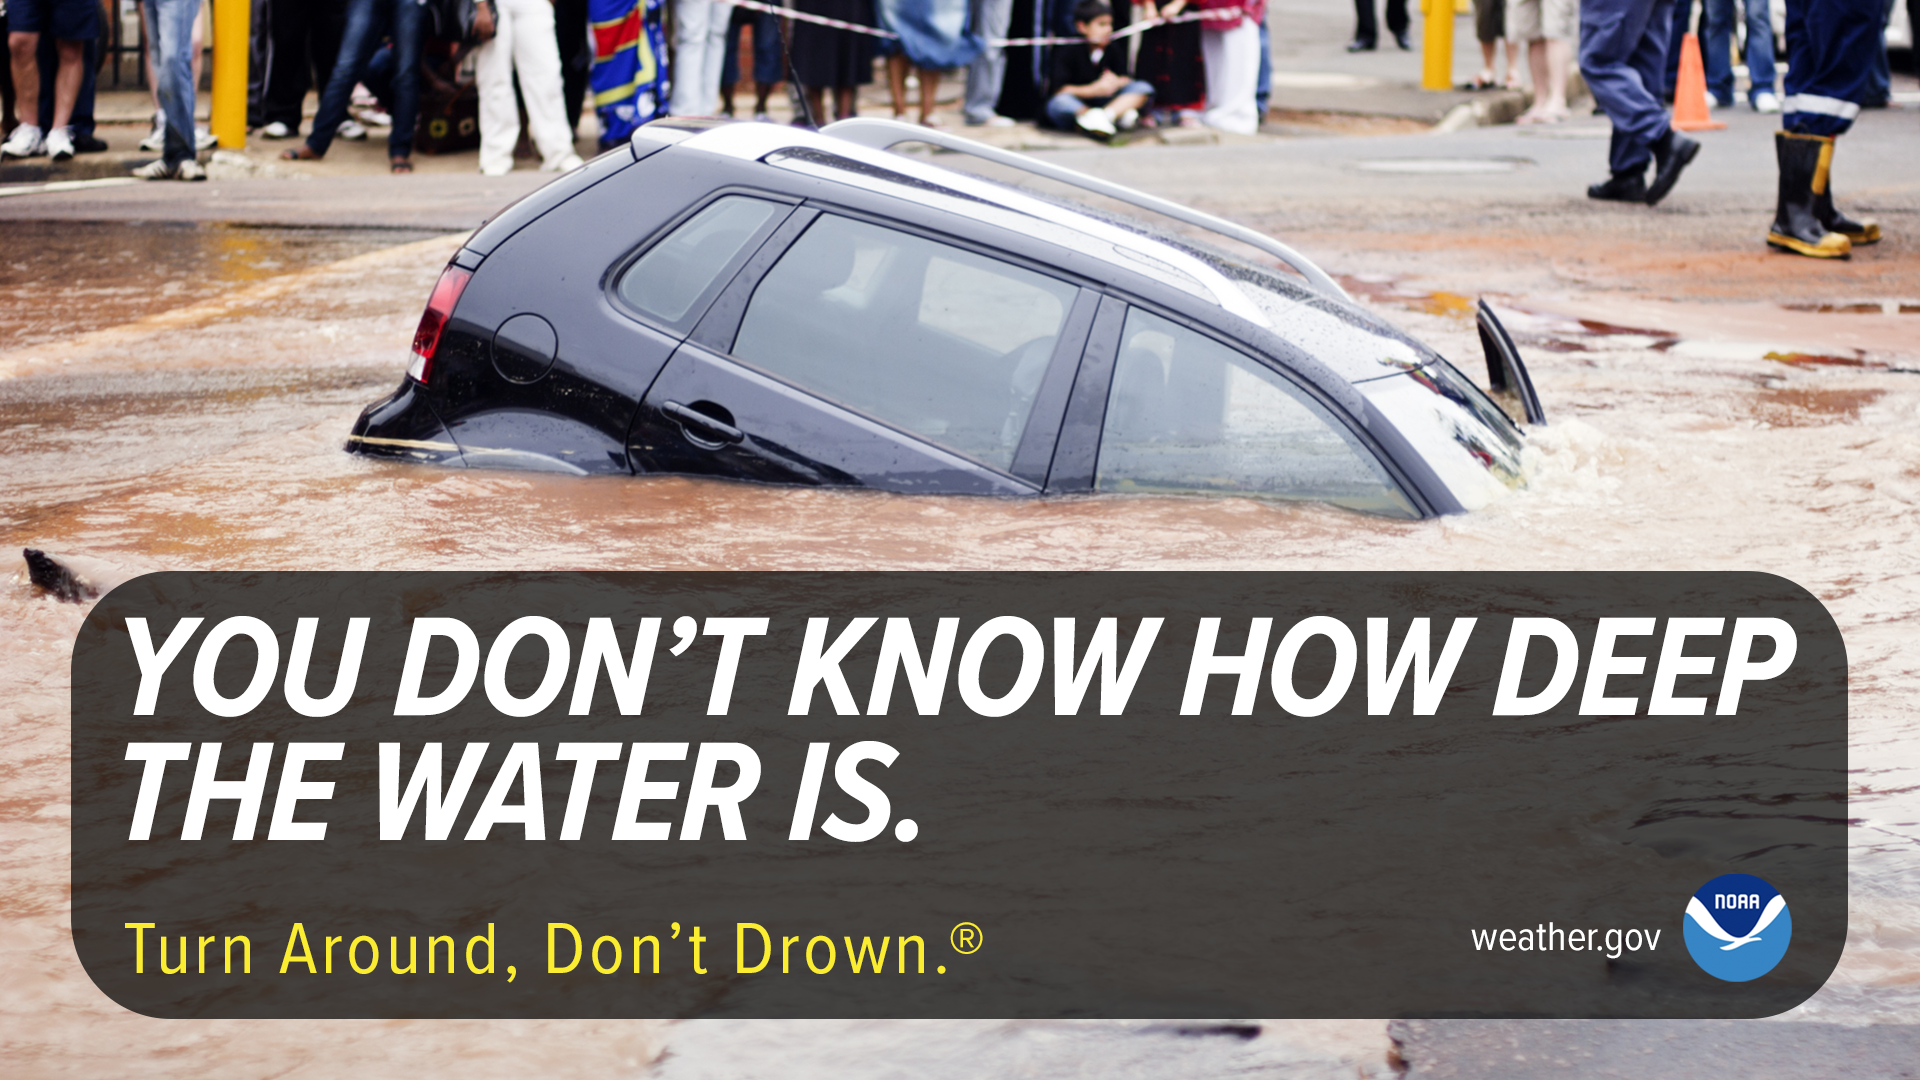 What does Weather-Ready look like? During floods: Motorists who never drive around barricades or through flooded roads.